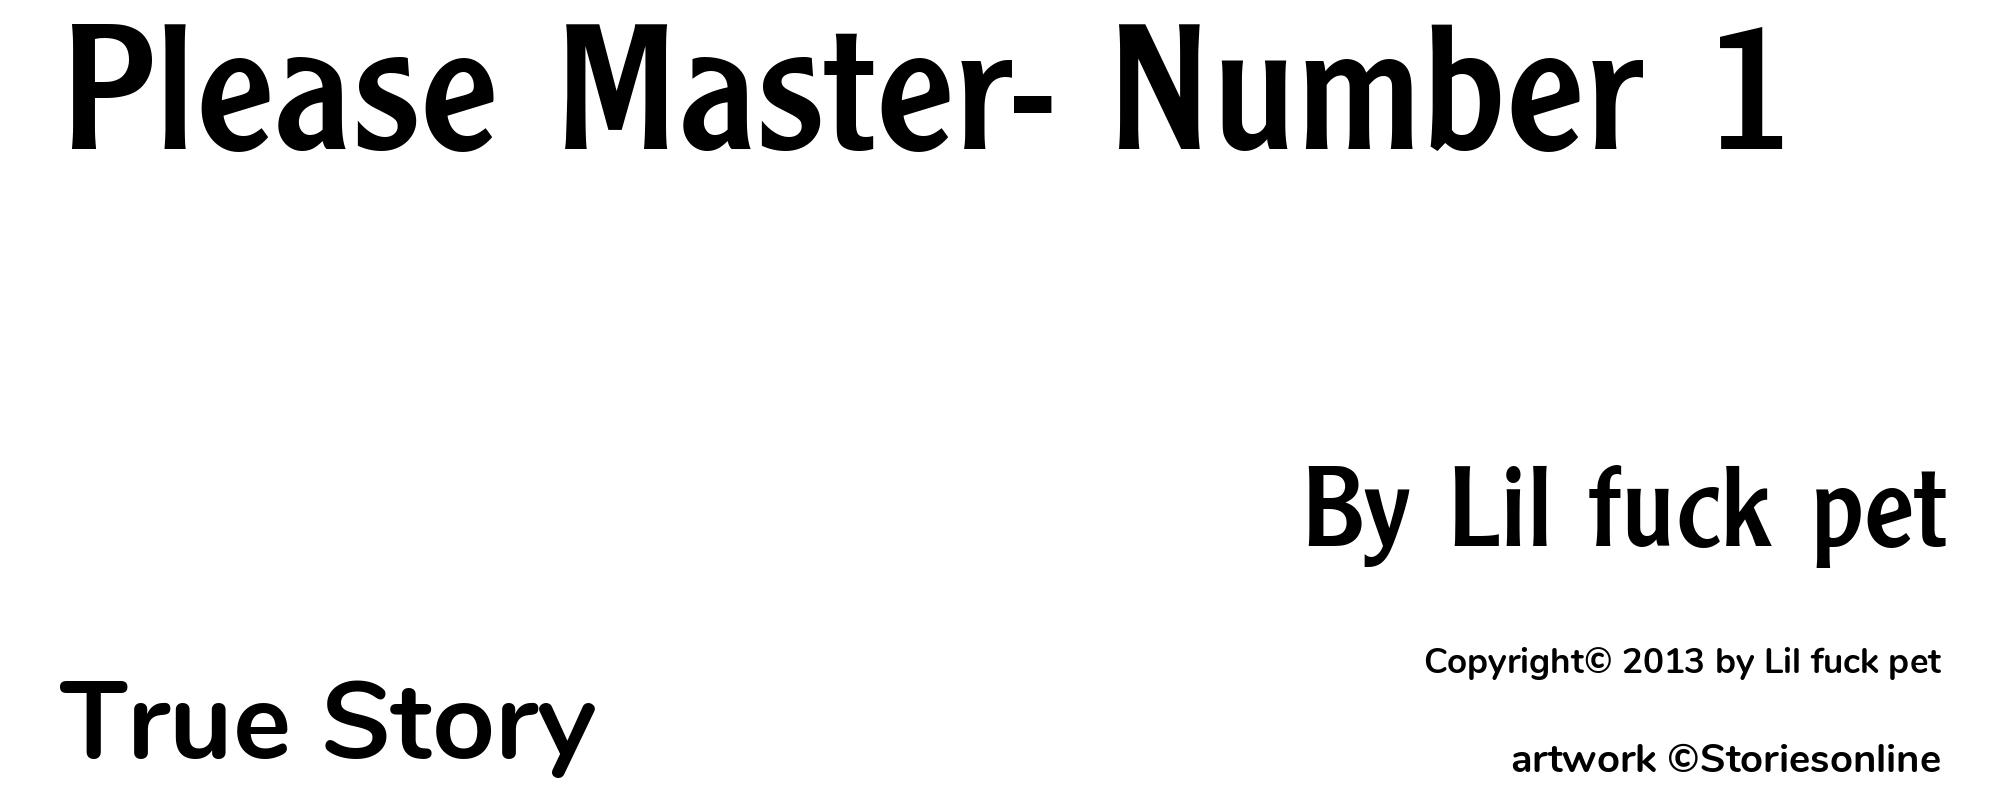 Please Master- Number 1 - Cover